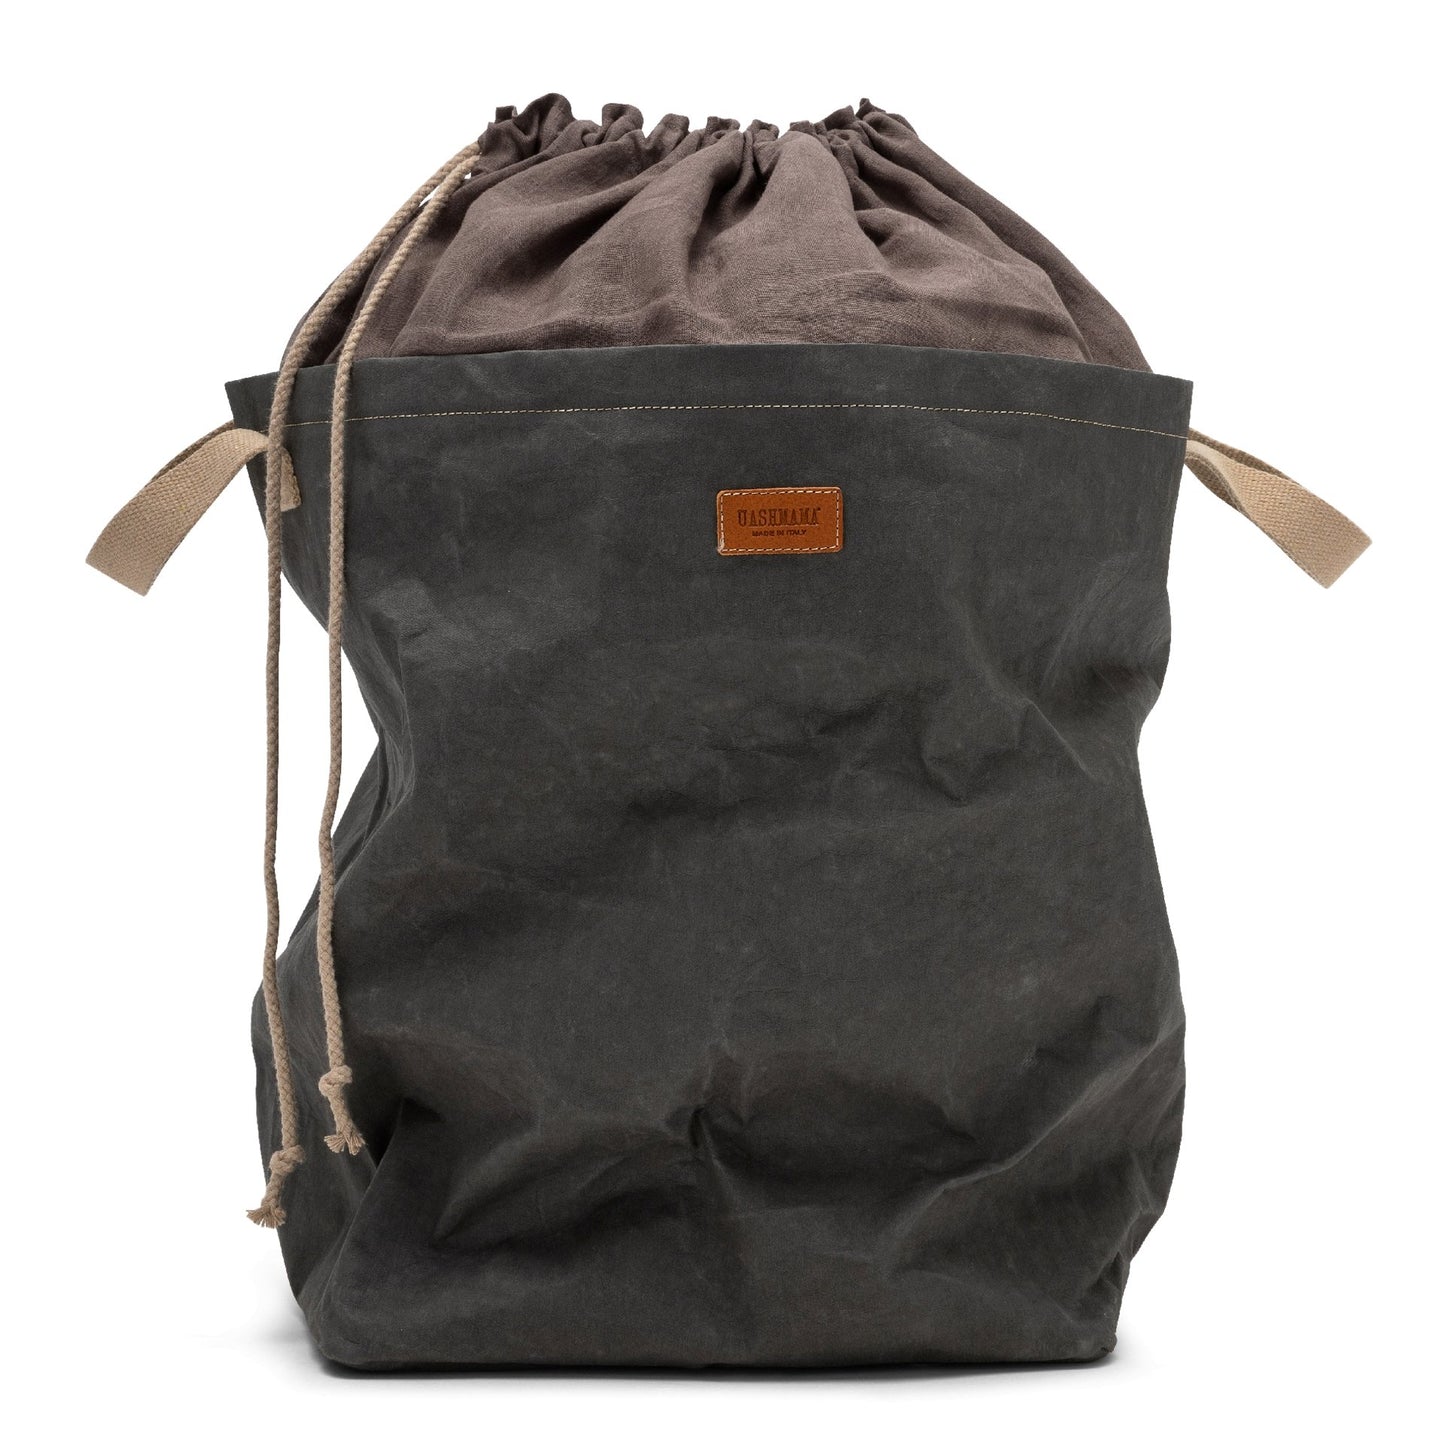 A washable paper laundry bag with a drawstring linen top is shown. The bag has two small recycled cotton handles on either side at the top of the bag, and one drawstring closure at the top. A small leather UASHMAMA logo leather label is on the front of the bag. The bag is dark grey in colour with a dark grey linen drawstring top.